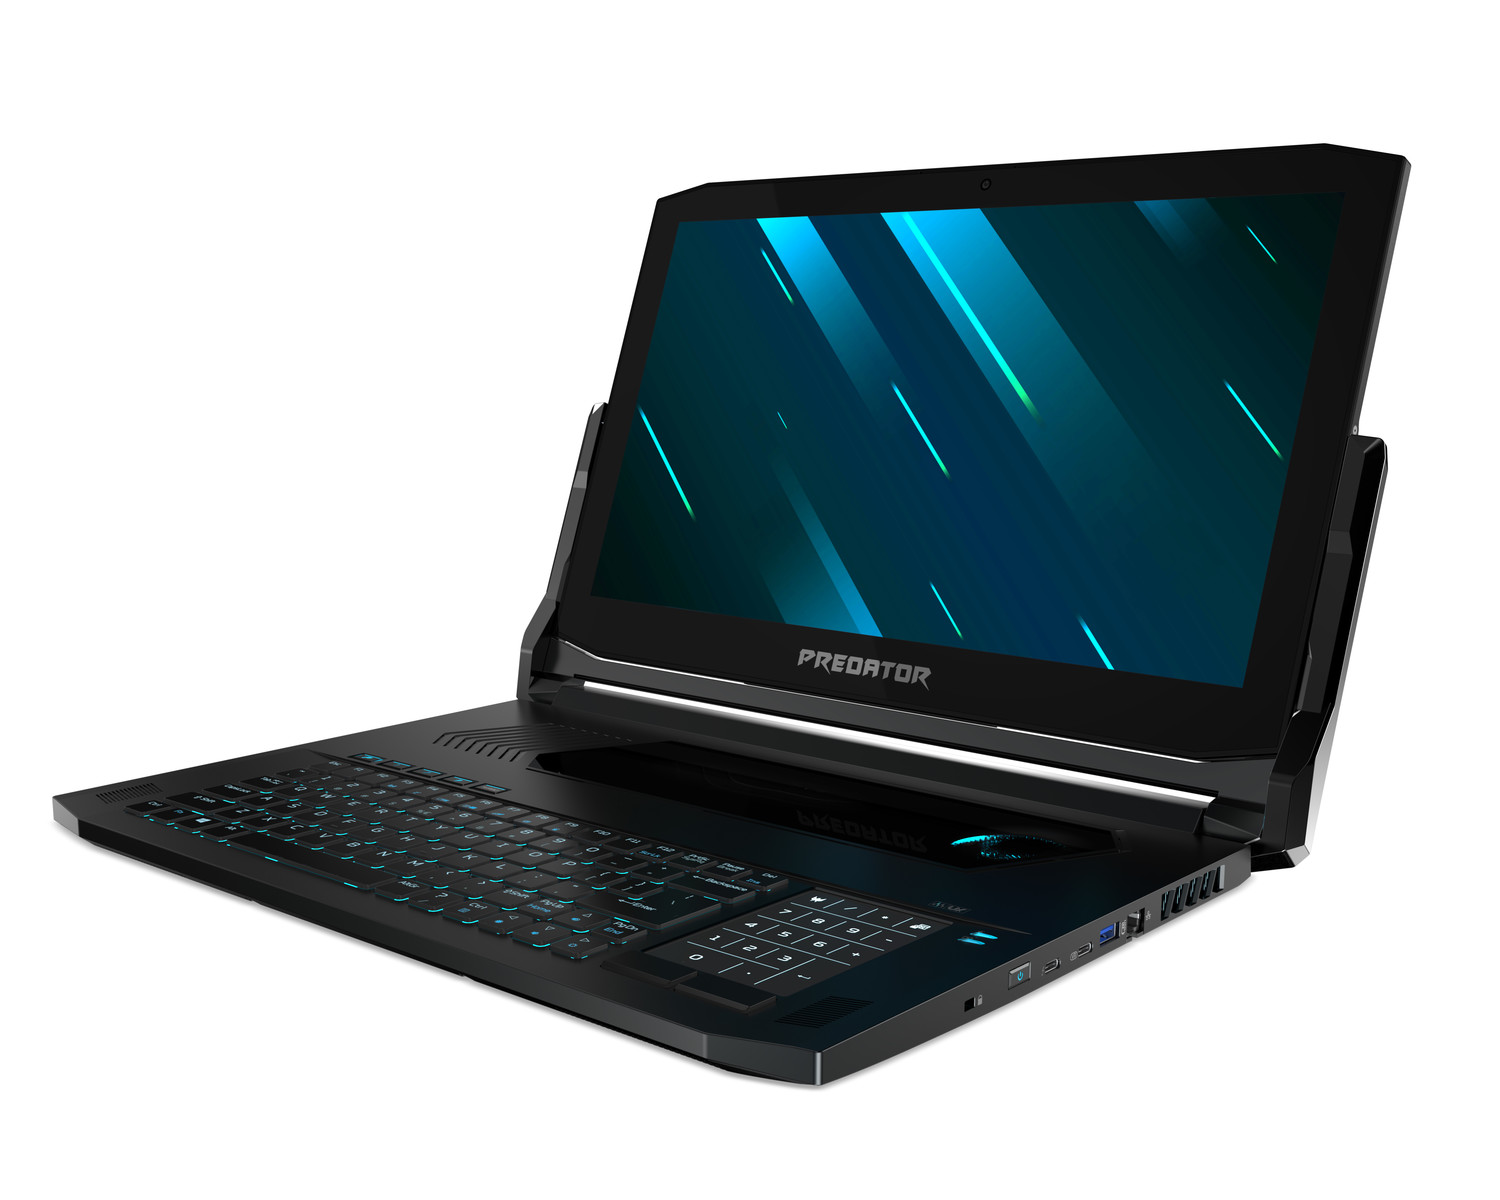 The Acer Predator Triton 900  packs powerful components in 